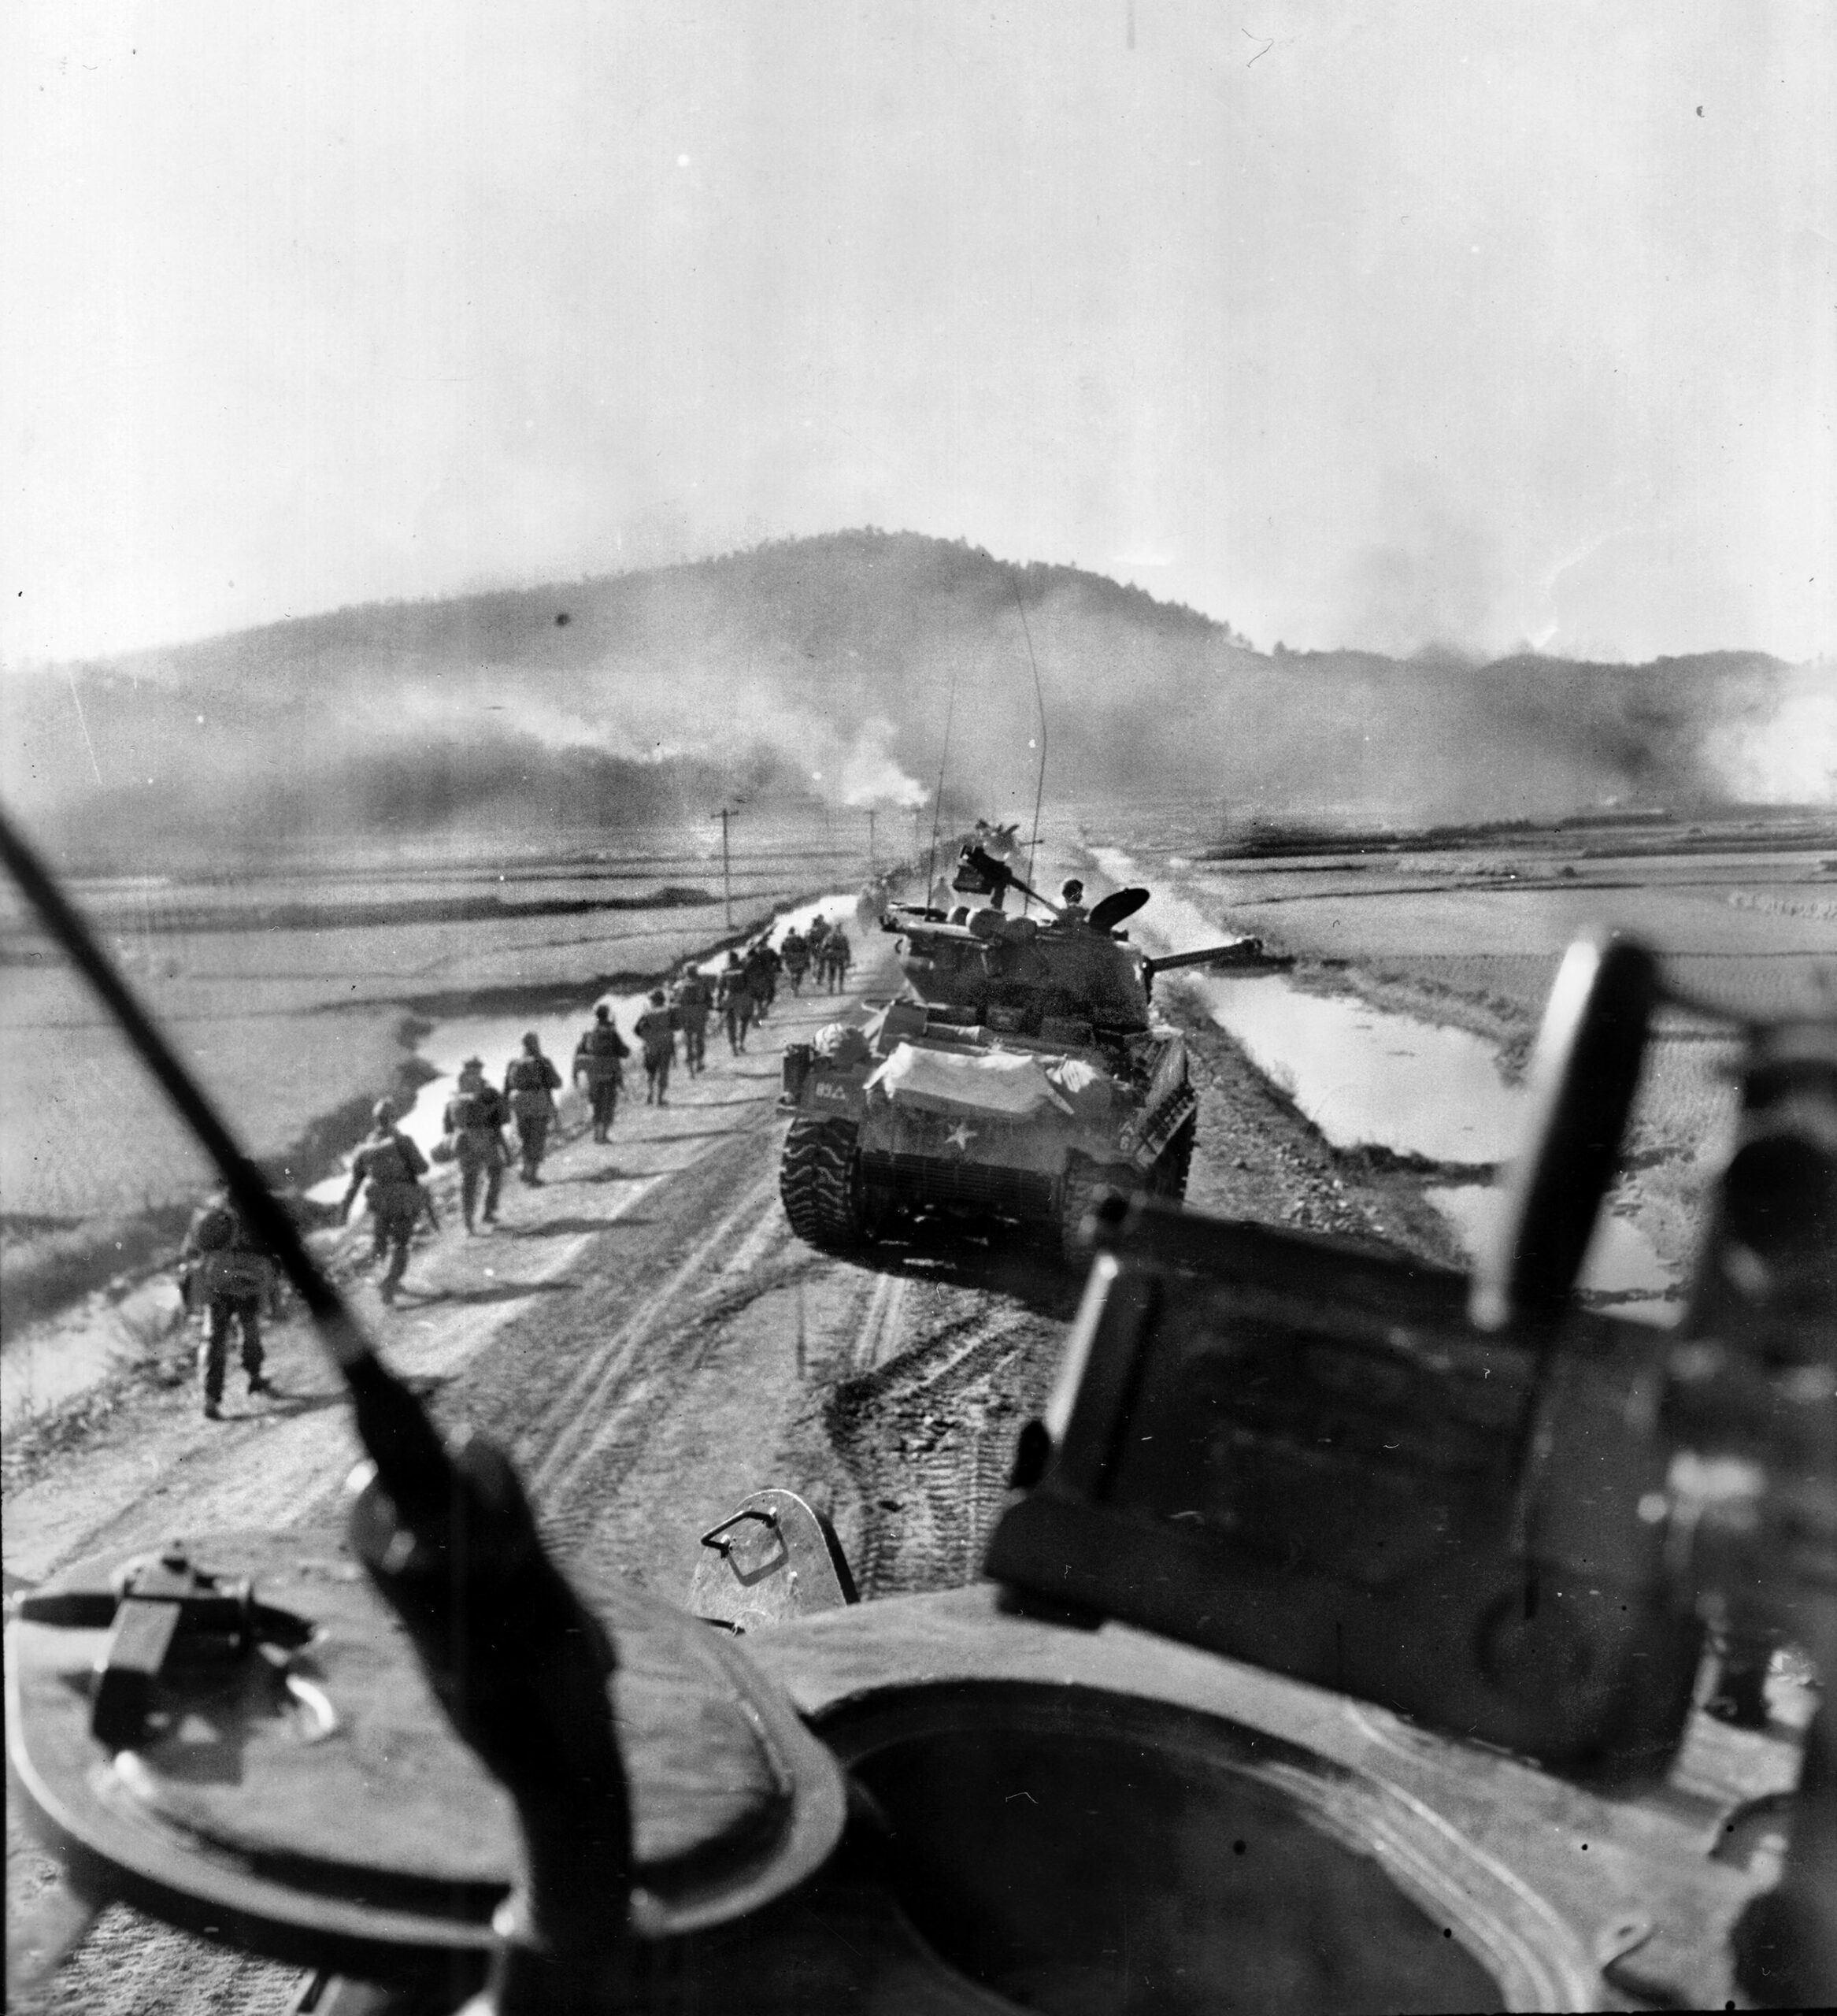 American tanks from the 89th Tank Battalion fire on enemy targets while troops from the British 62st Middlesex Regiment advance against the North Koreans. 